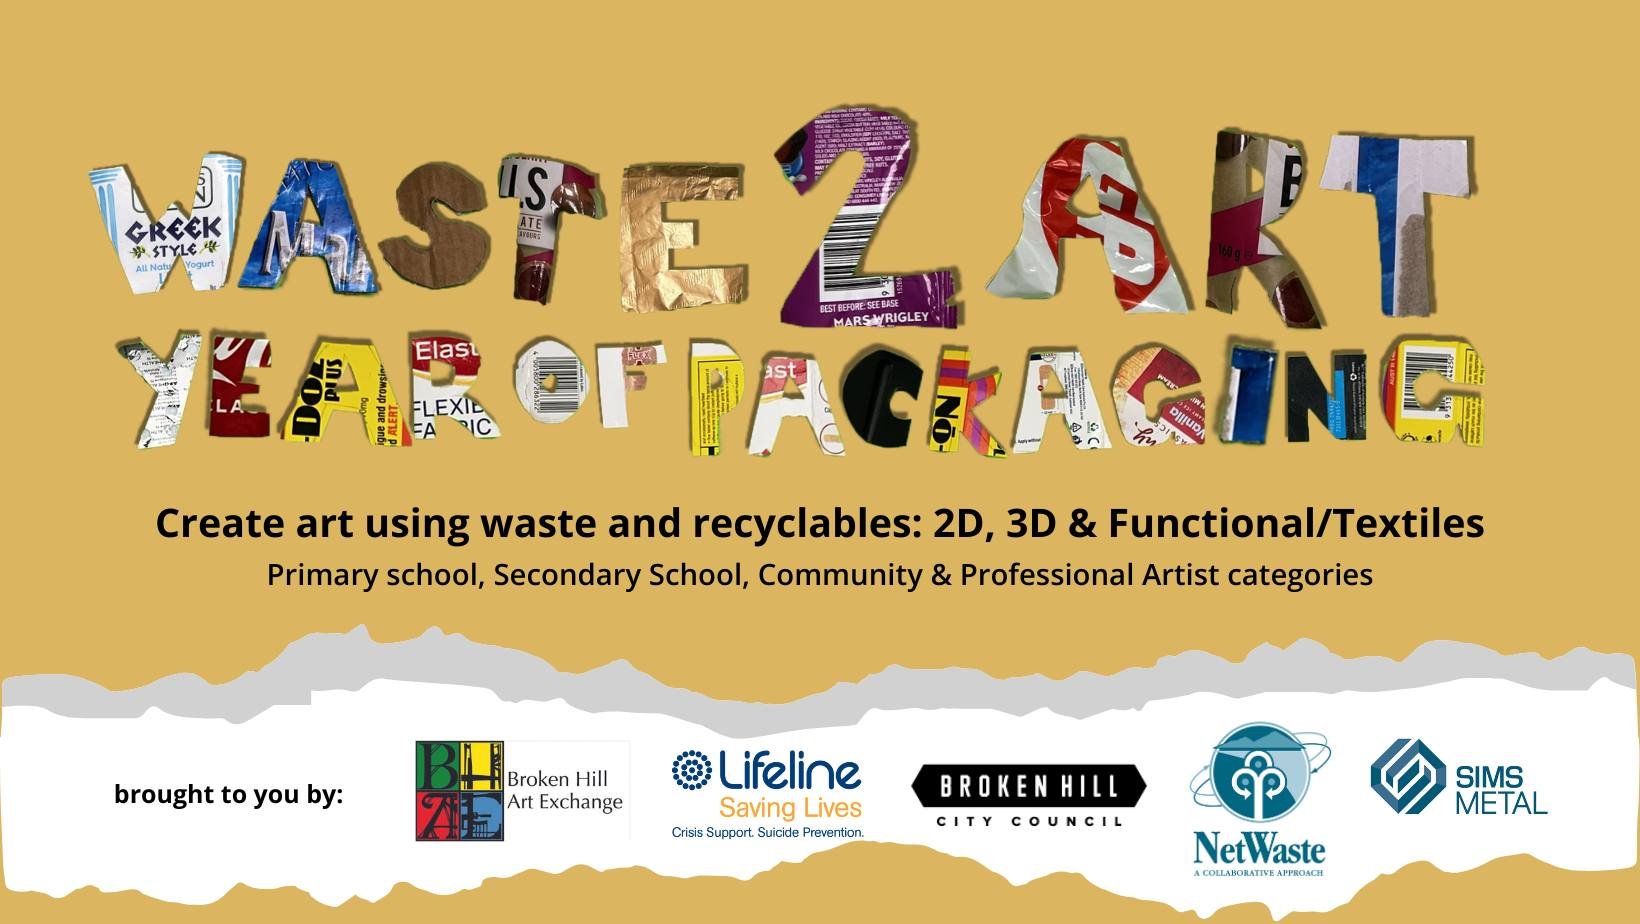 Last Waste 2 Art workshop on Saturday, come along and create an artwork from waste, we have plenty of supplies or bring something you are working on. Two artists will be in attendance if you need some inspiration and the best part is, its free :)

ht